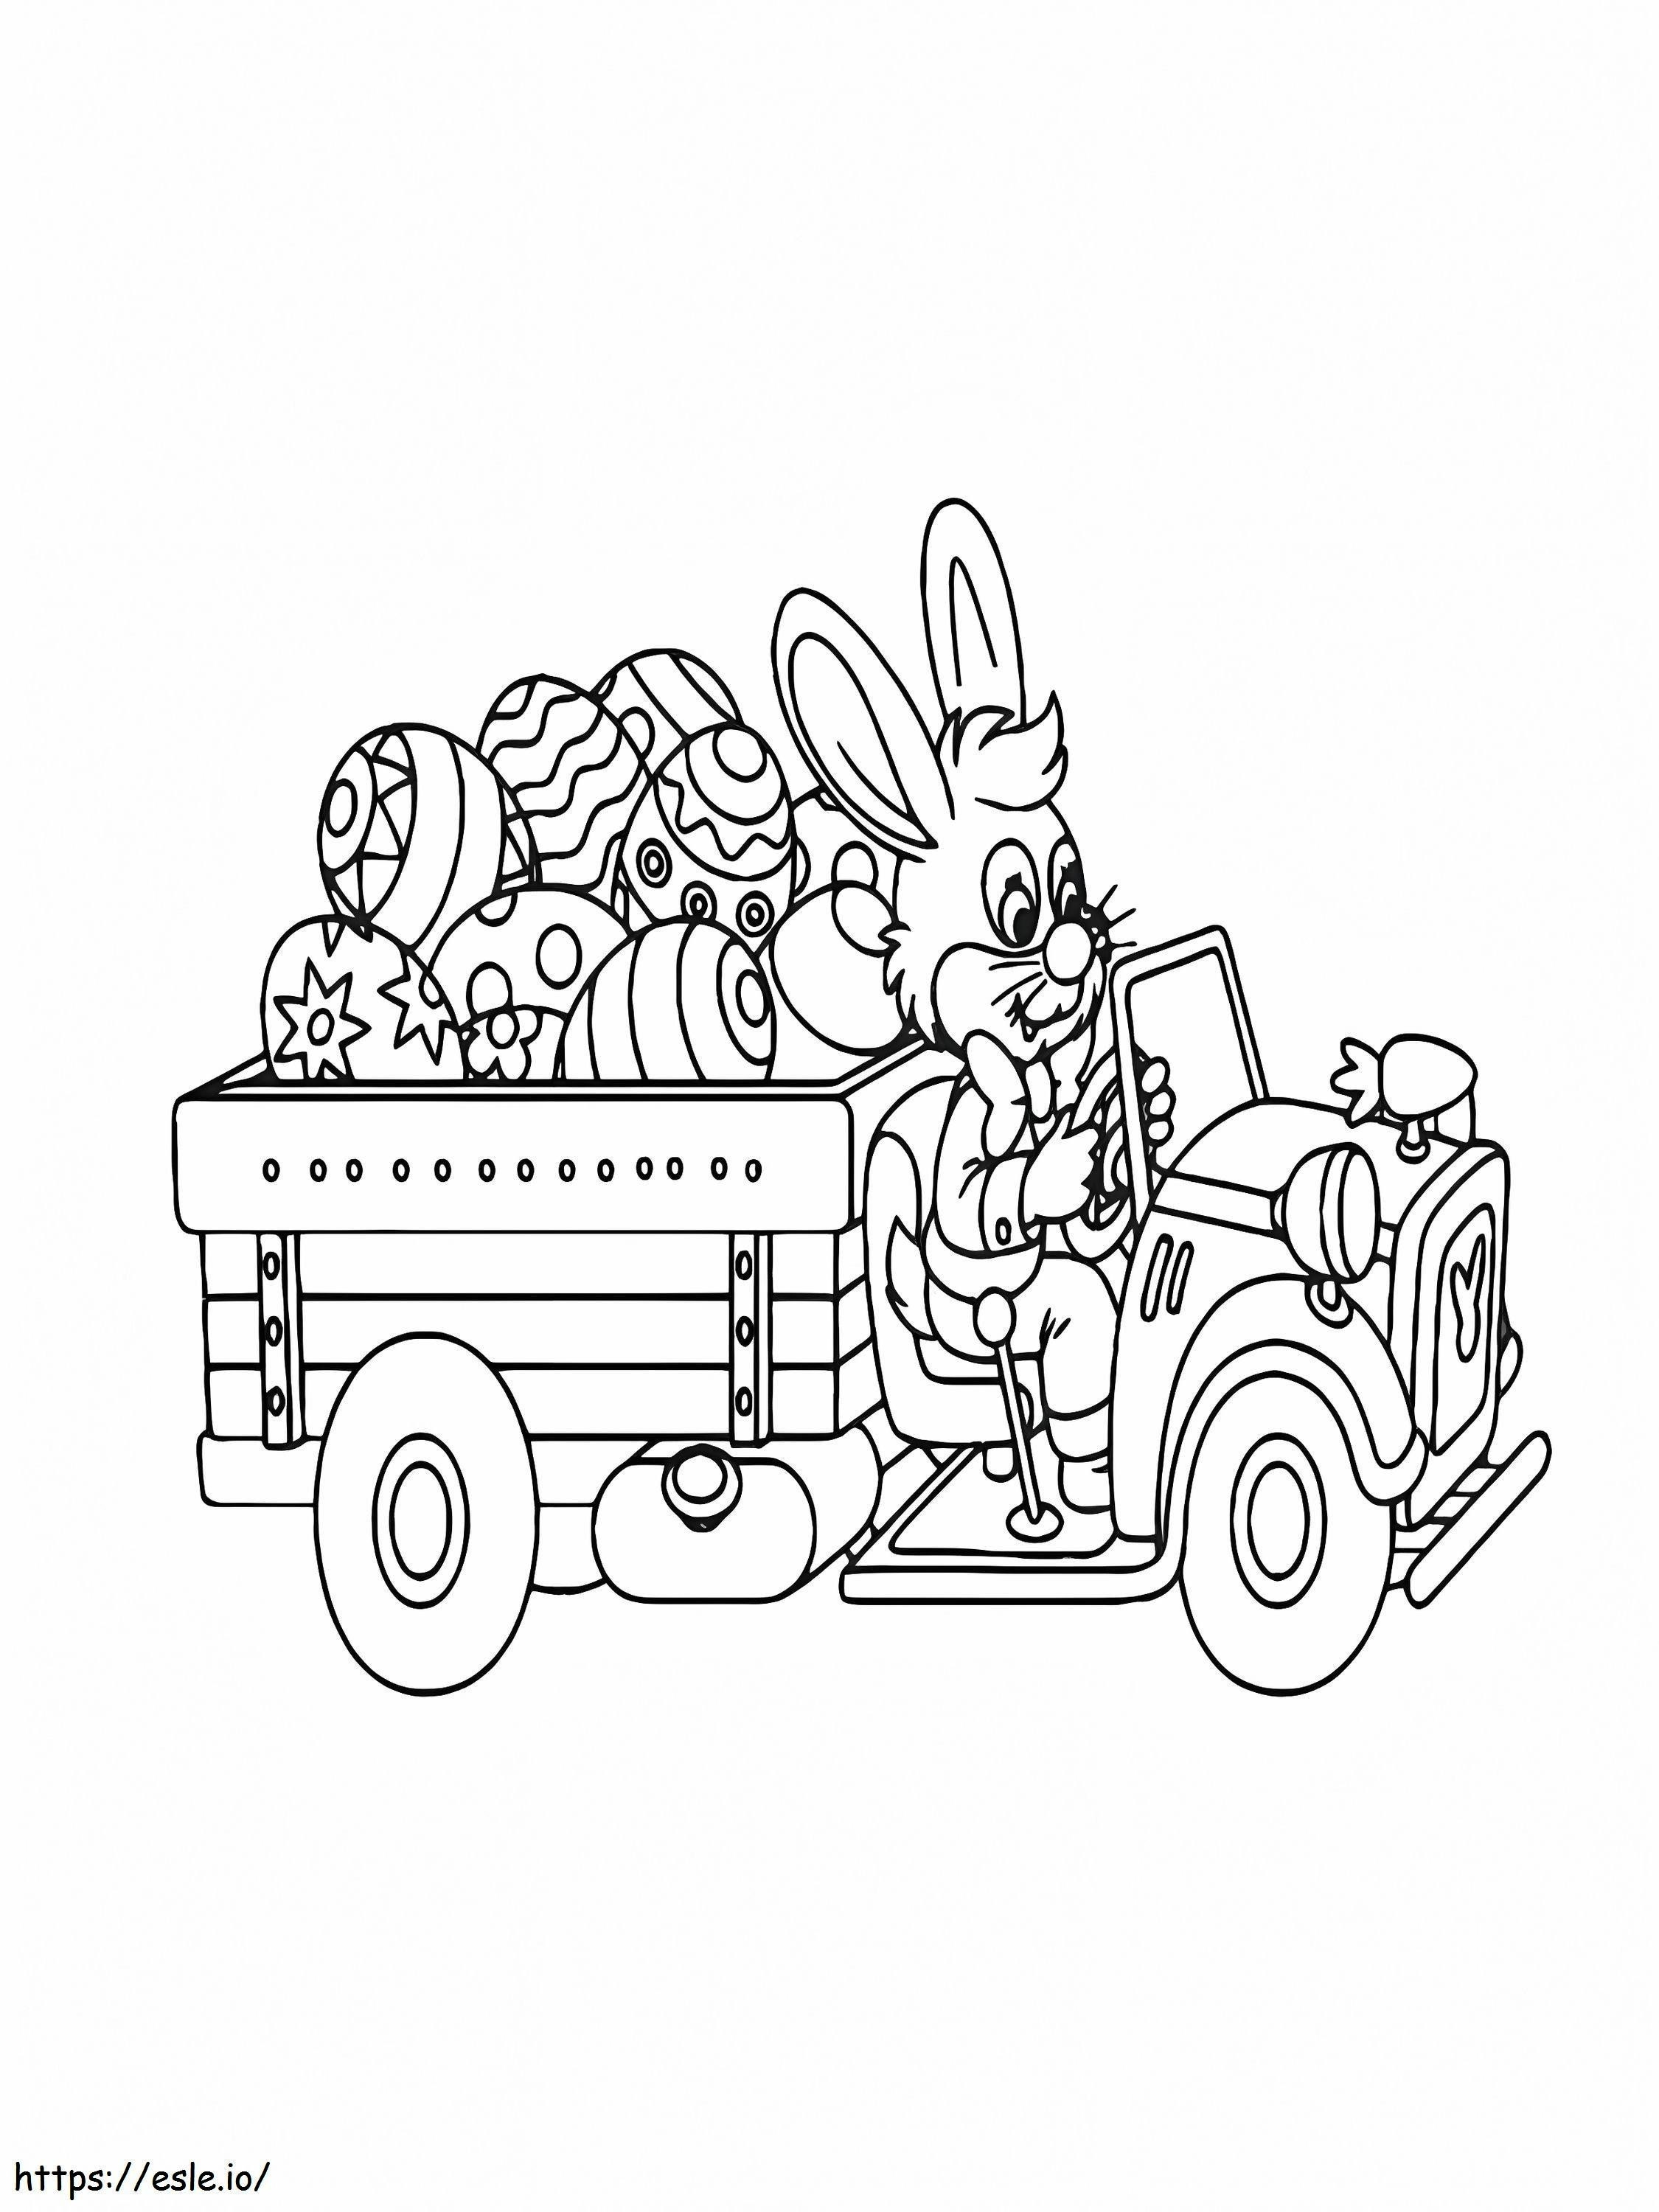 Easter Eggs In Truck coloring page